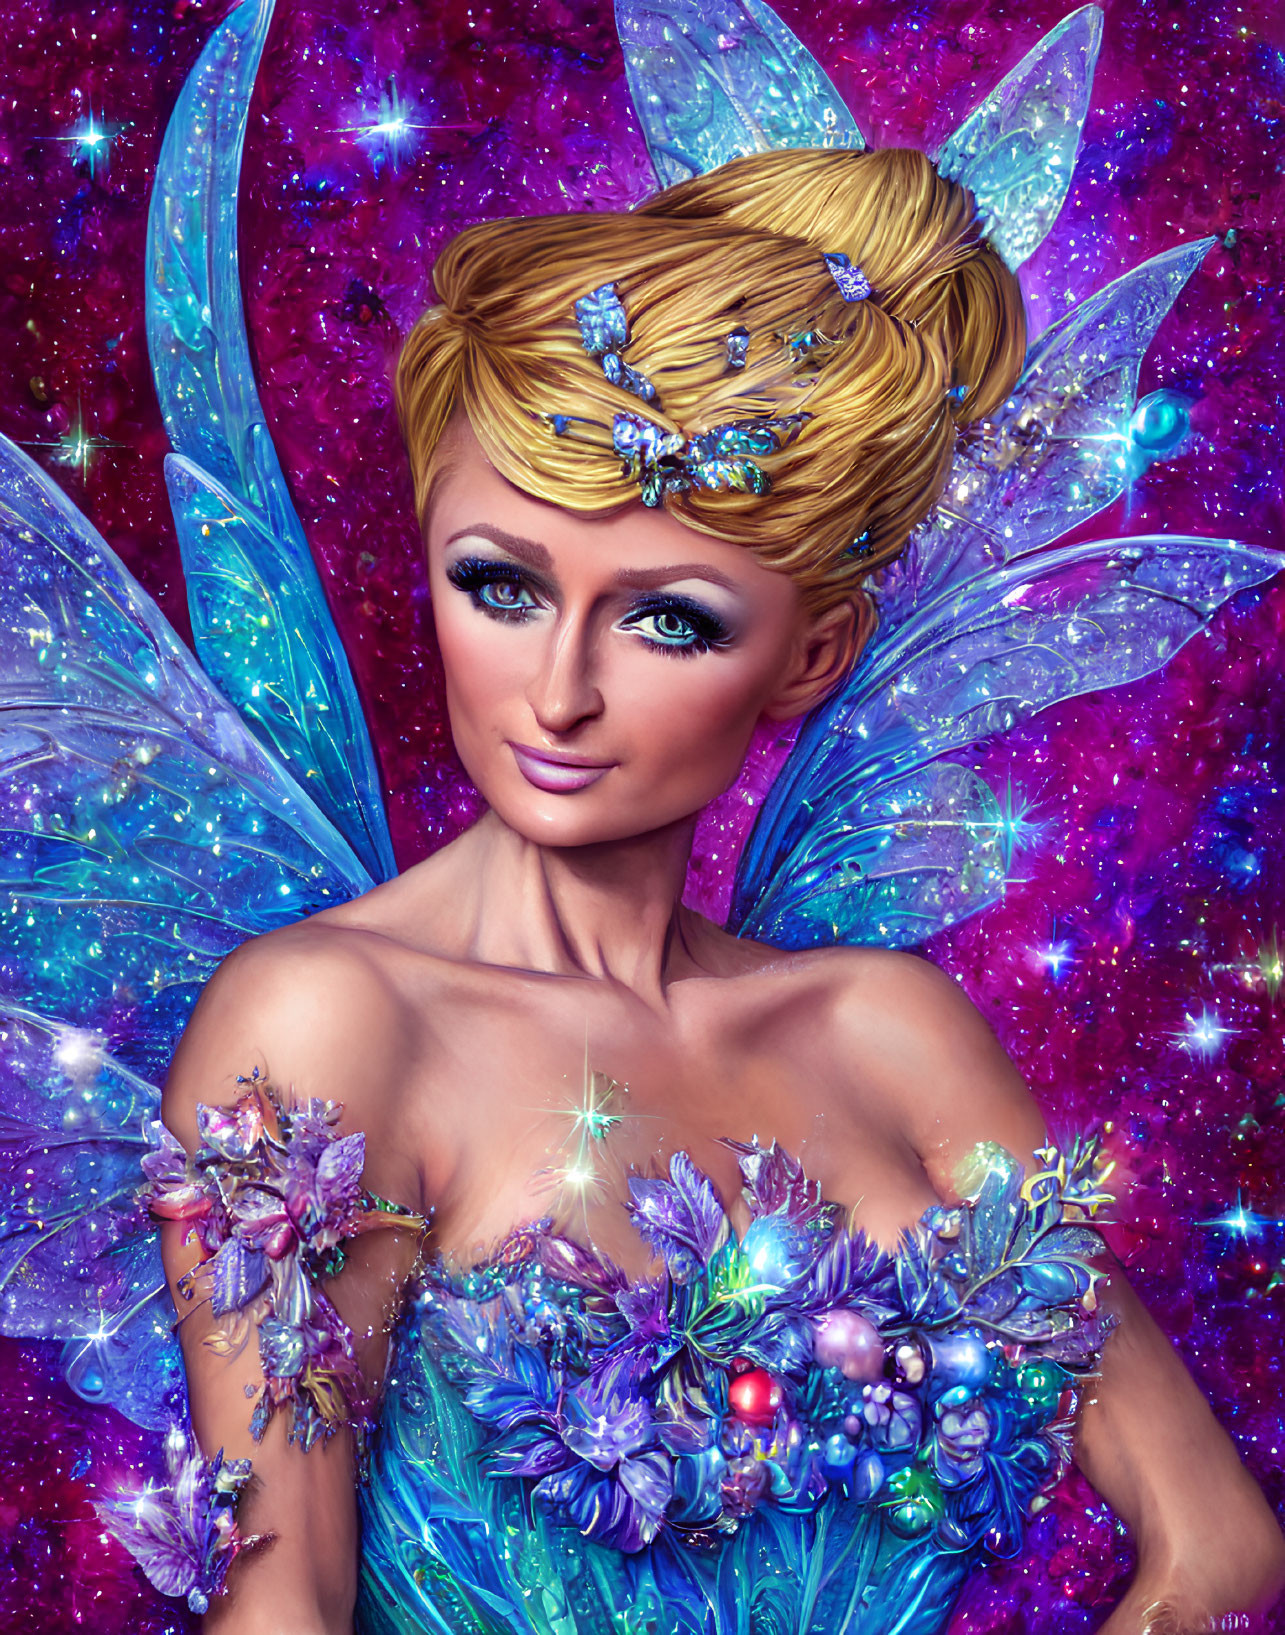 Fairy with Blue Wings and Floral Accents on Cosmic Background